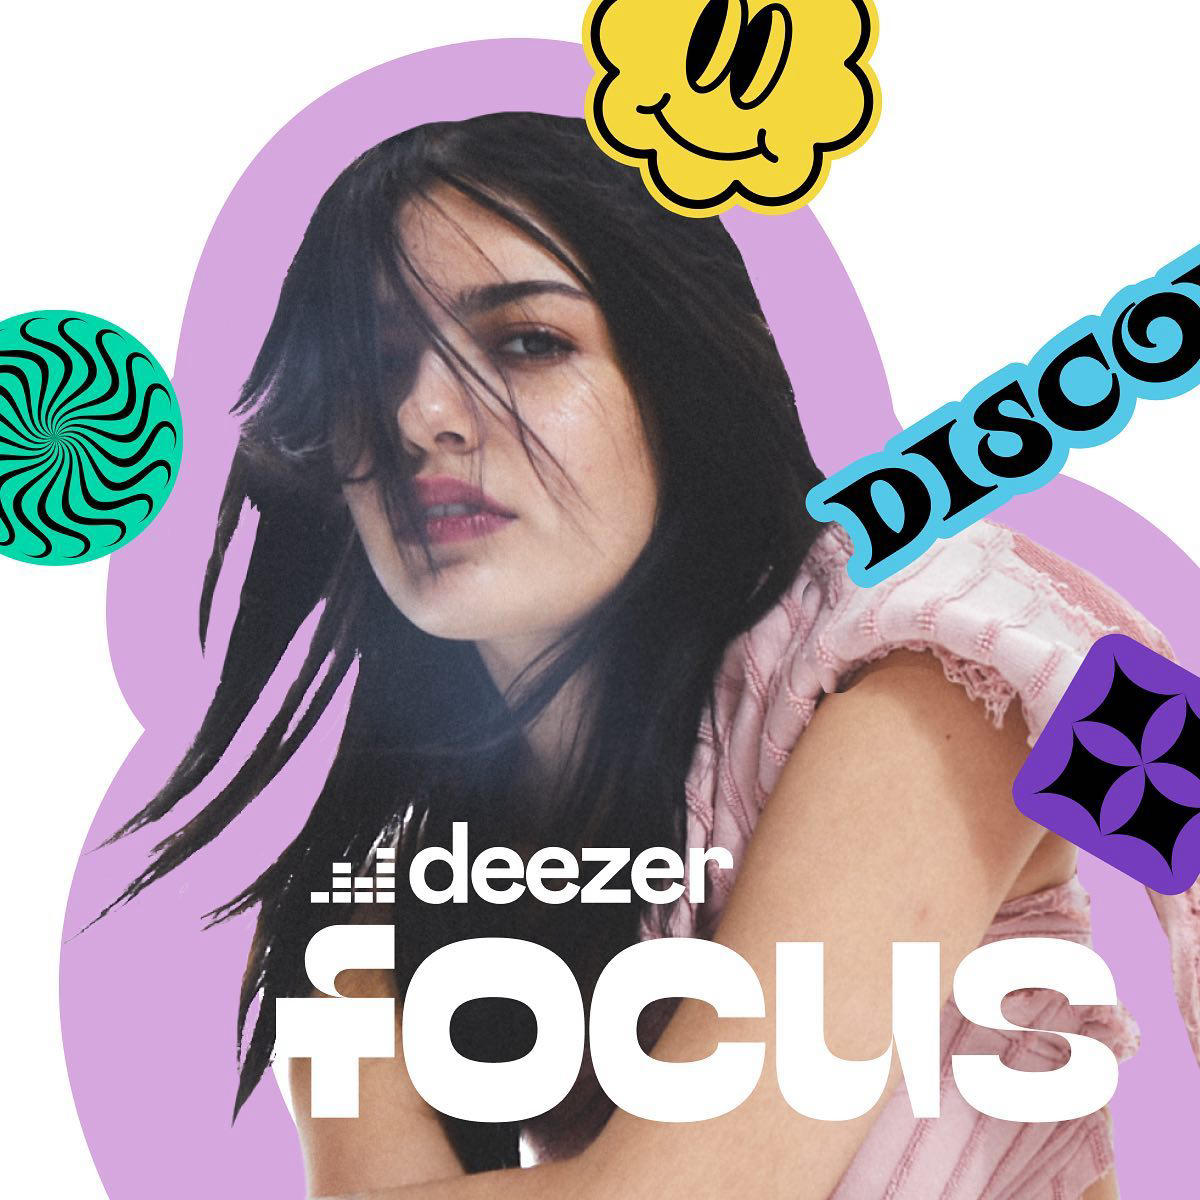 So excited to announce the talented yunè pinku as our Deezer Focus artist for April